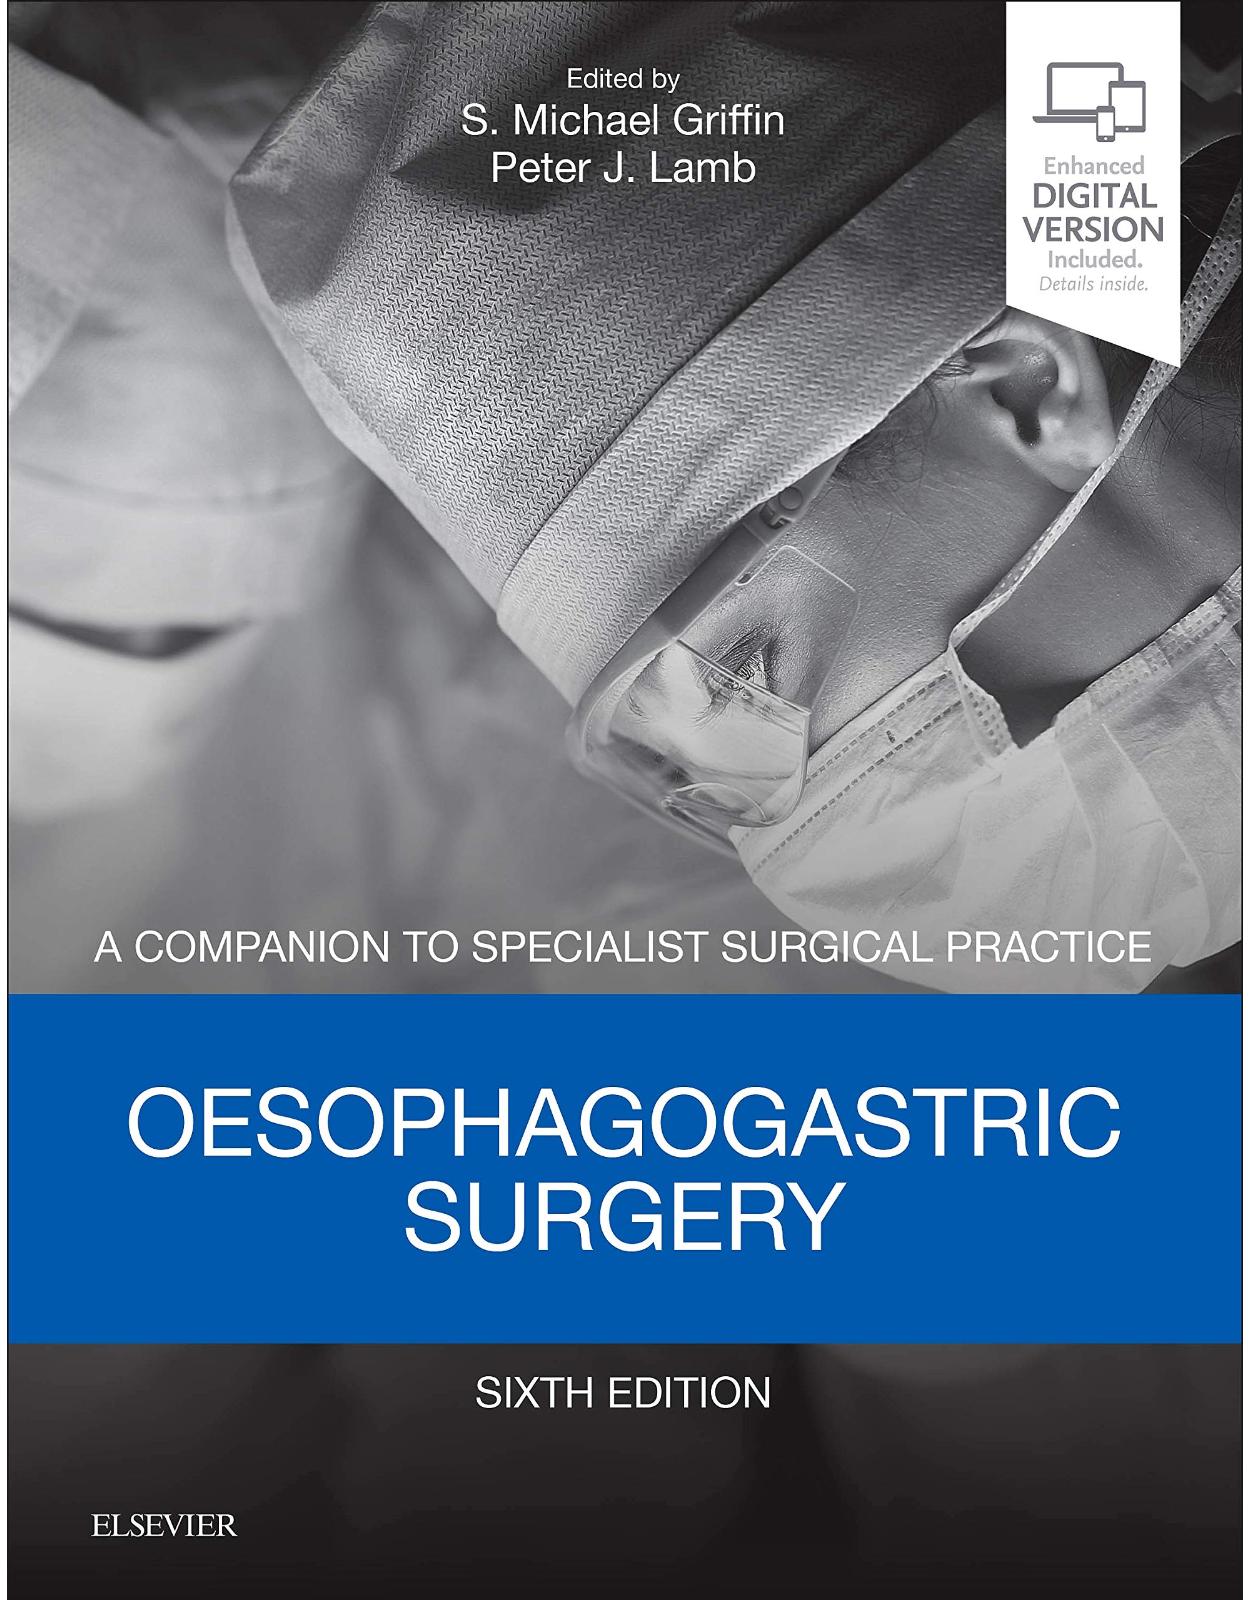 Oesophagogastric Surgery: A Companion to Specialist Surgical Practice, 6e